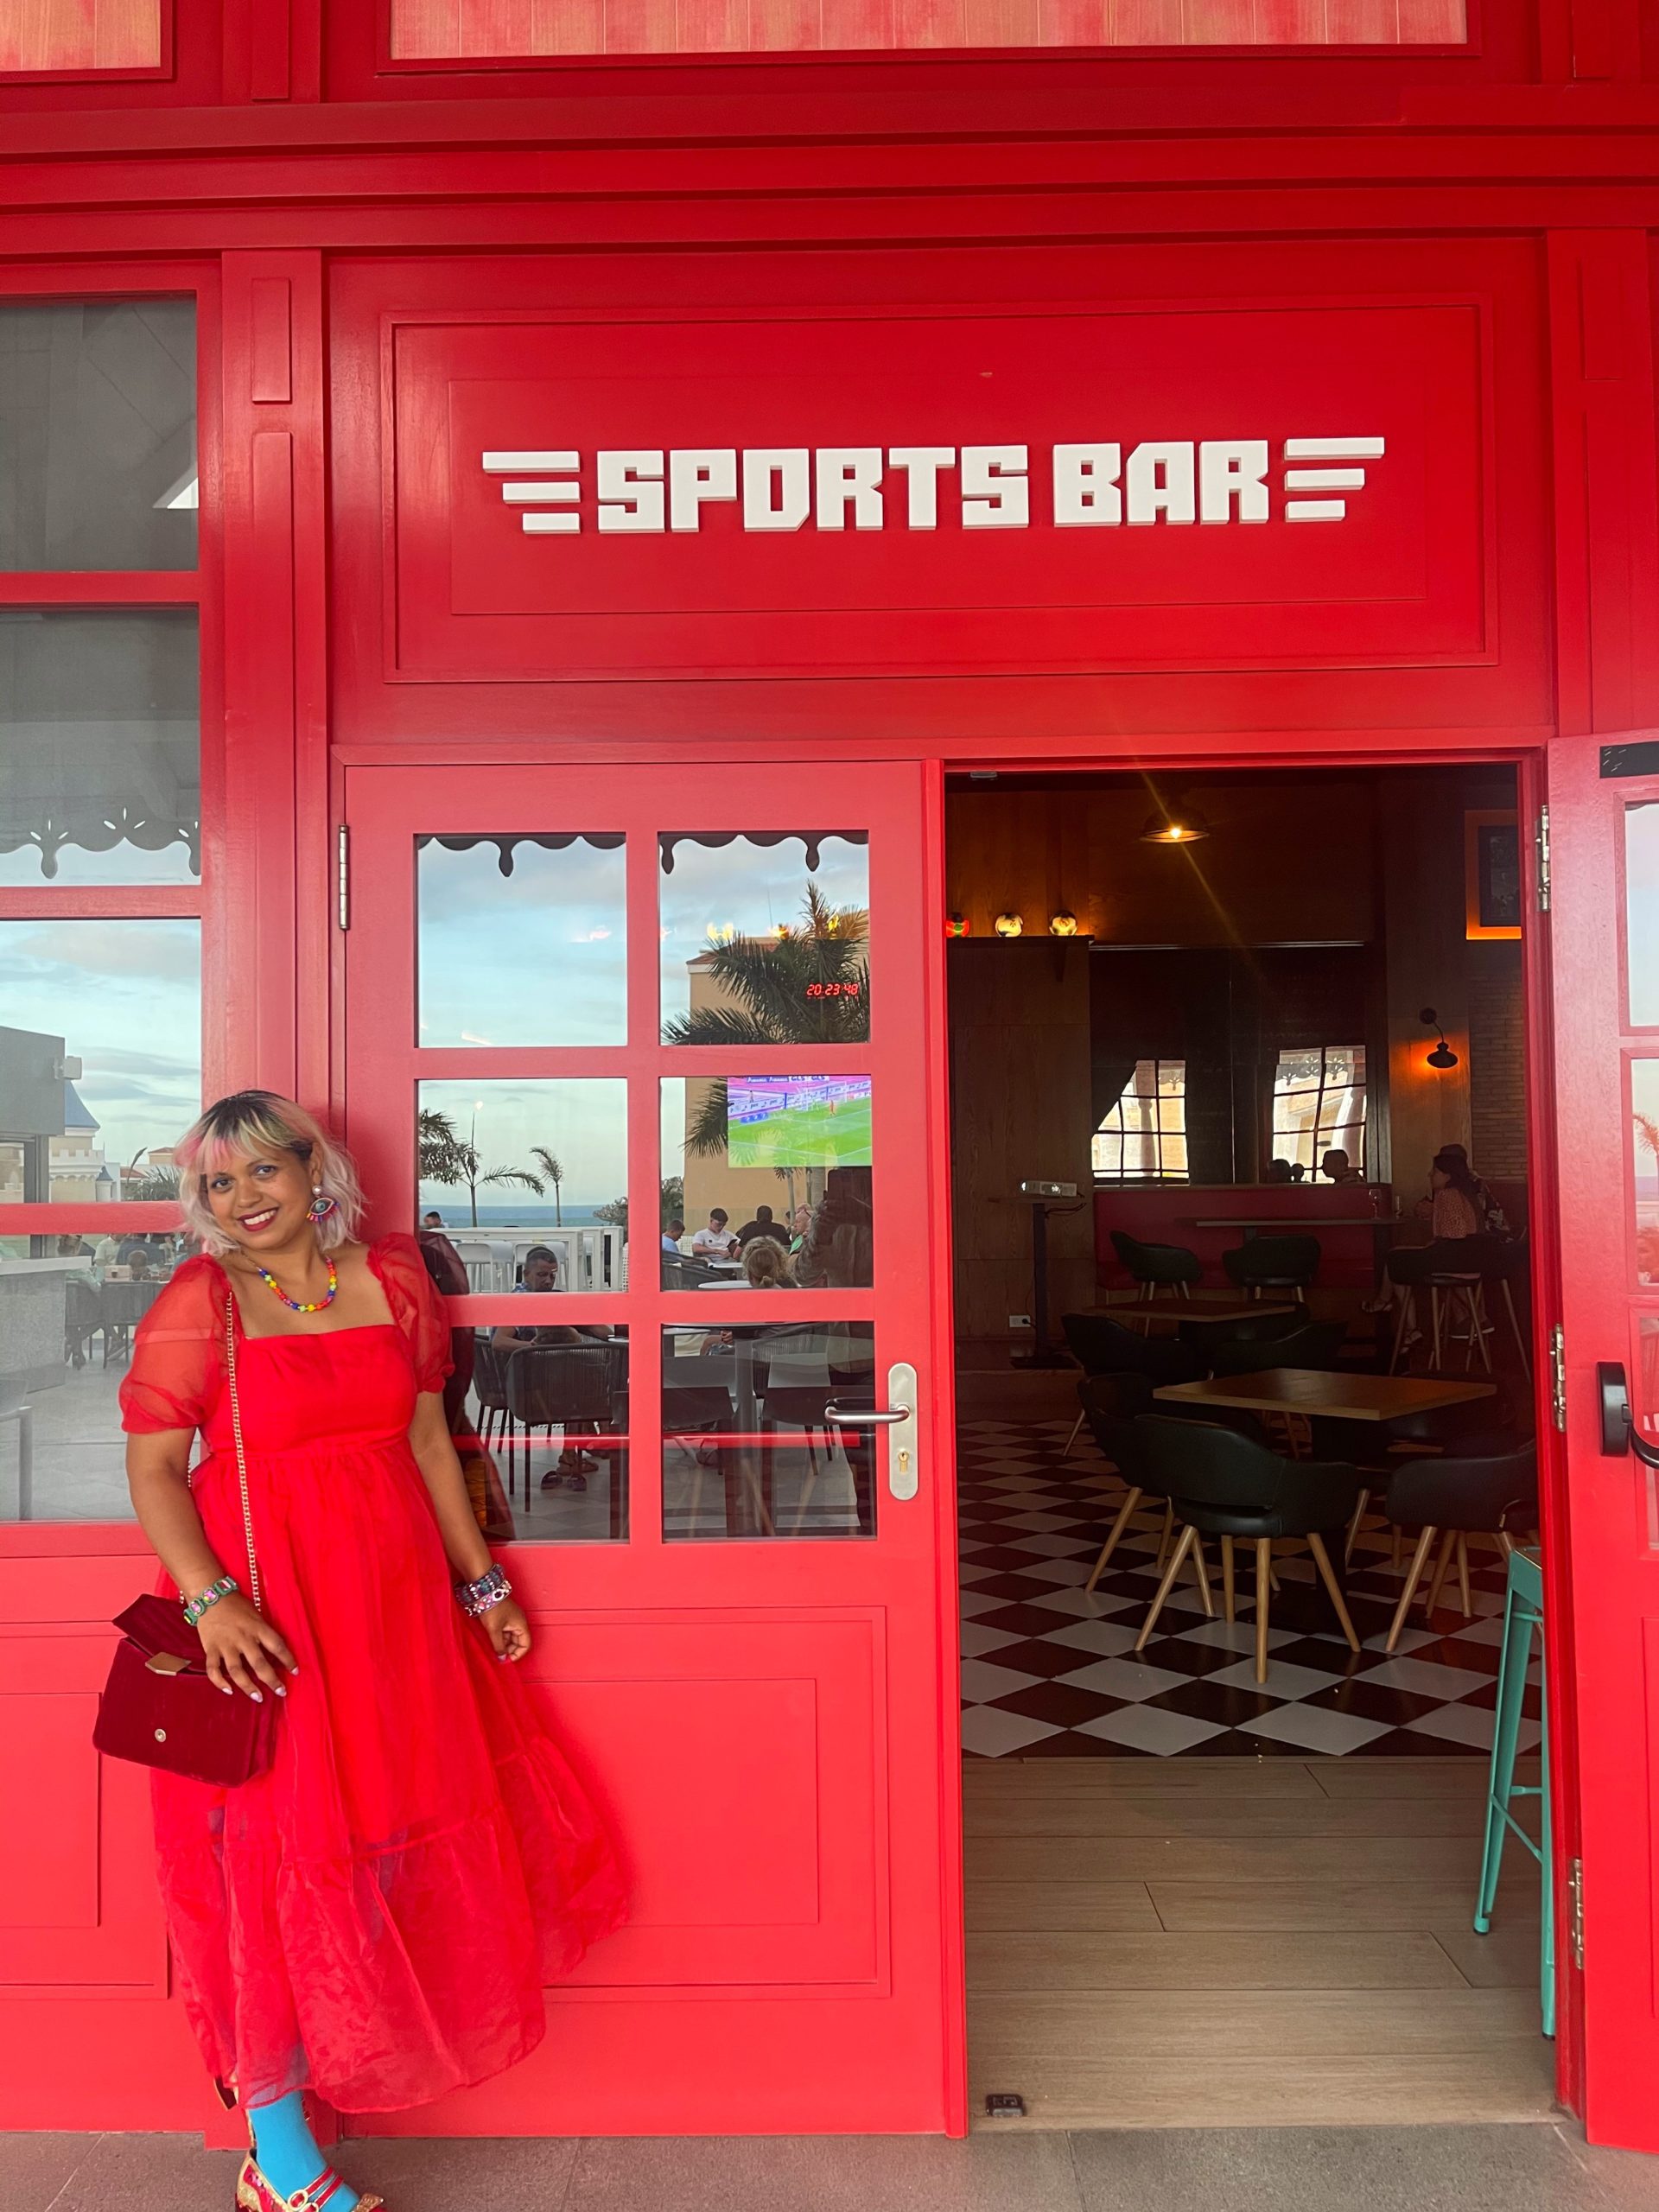 Momtaz wears red dress and stands out side a red bar with sports bar written on it